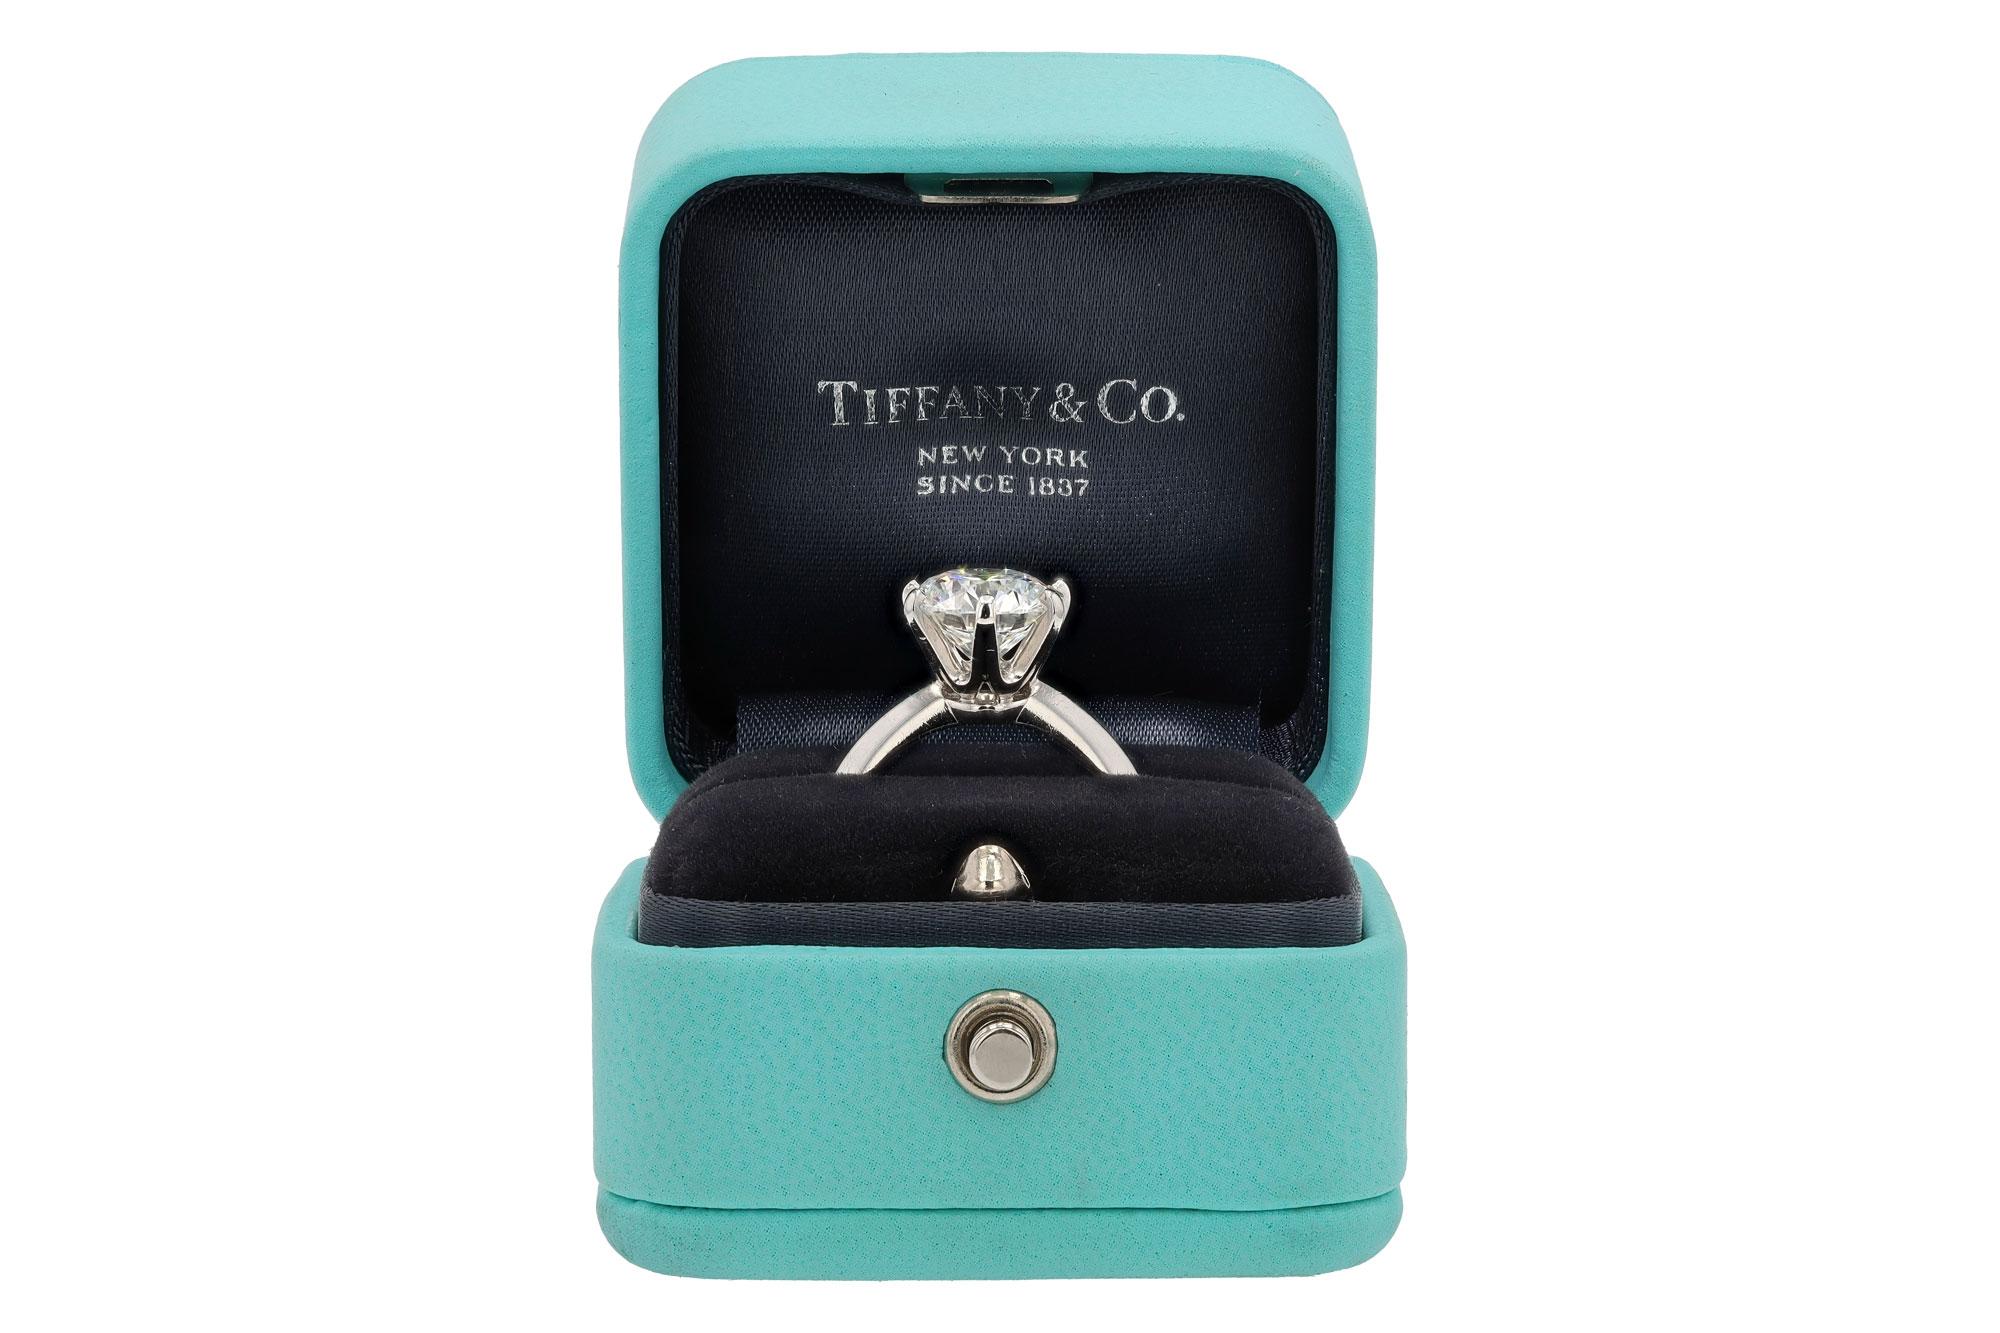 Presenting to you a significant Tiffany & Co solitaire diamond engagement ring. Exquisite and luxurious, this ring boasts a 3.24 carat round brilliant cut diamond displaying an incredible G color and VS1 clarity, being of the highest degree of